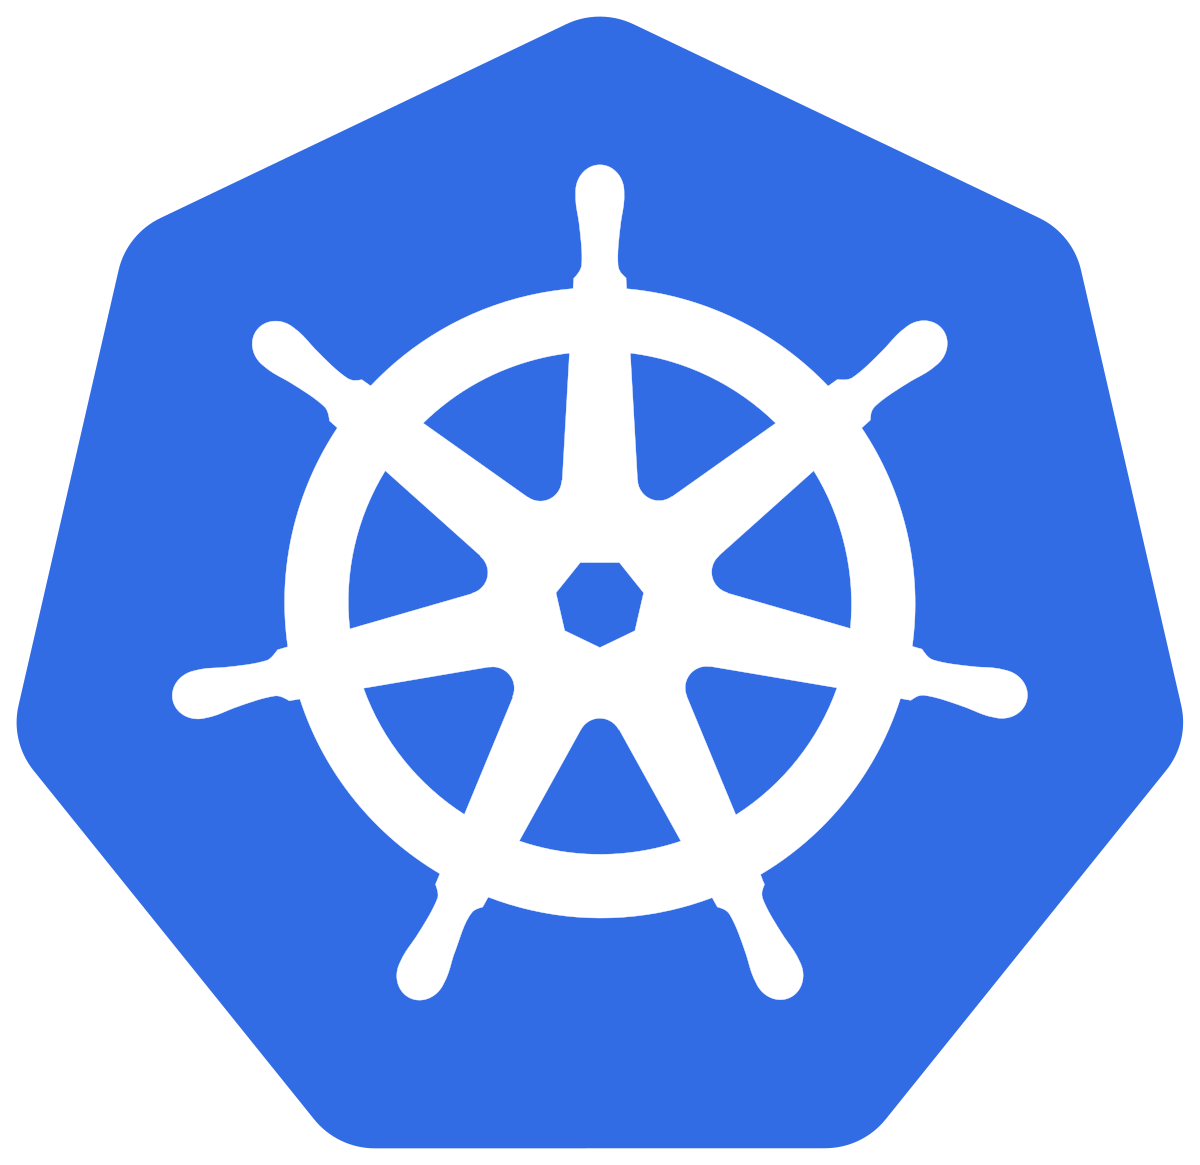 Deploy control plane and/or runners with Helm on Kubernetes